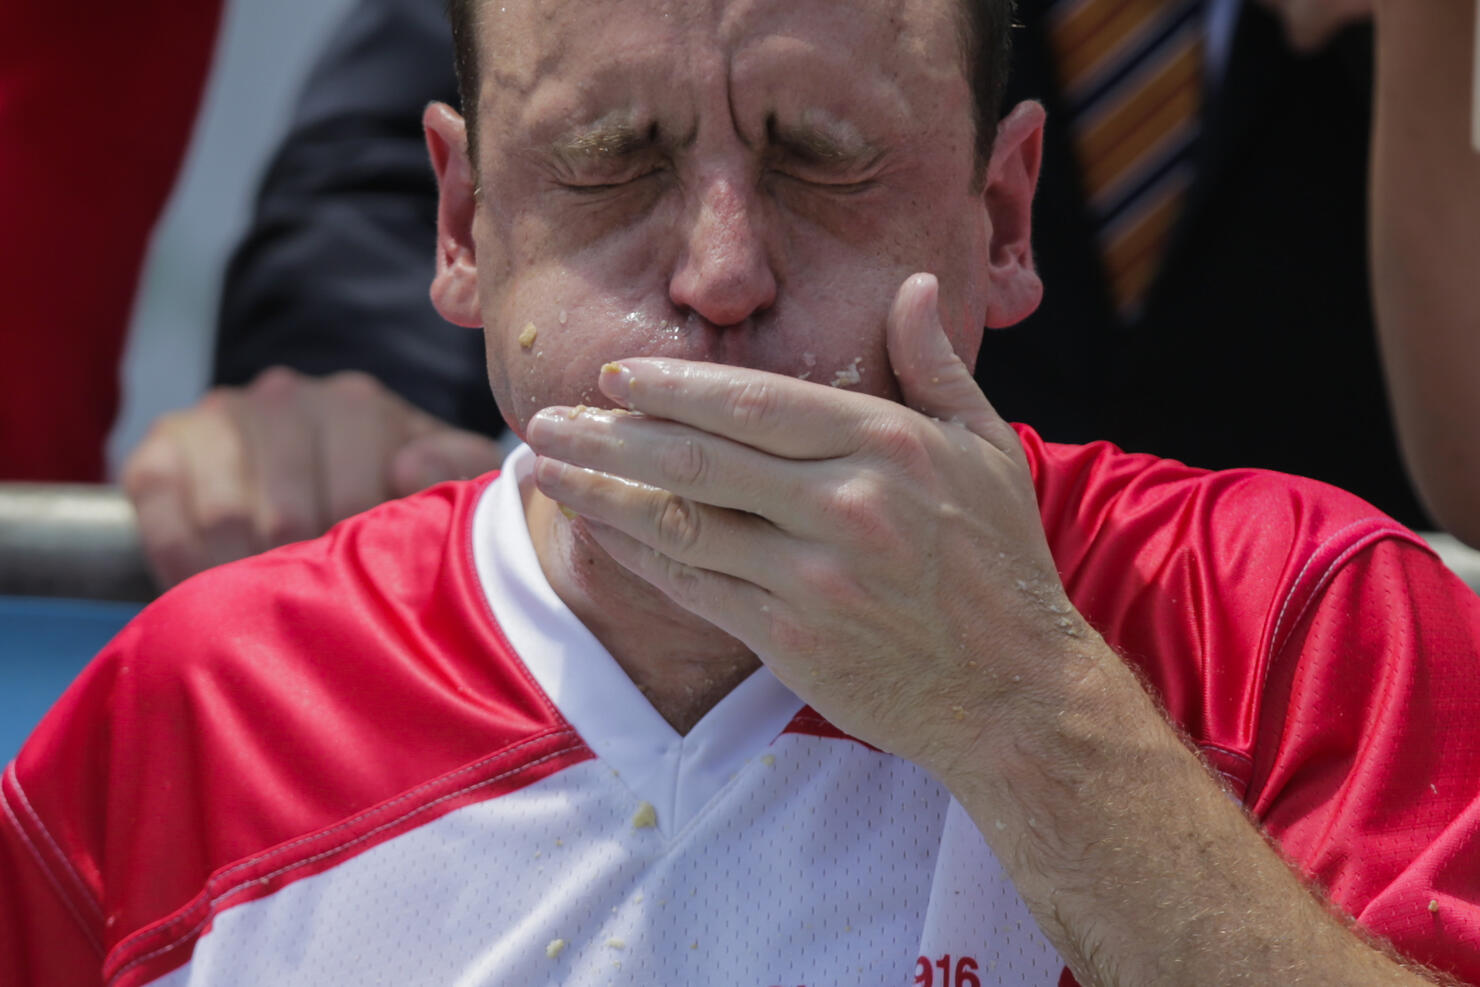 Joey Chestnut sets new world record at hot dog eating contest